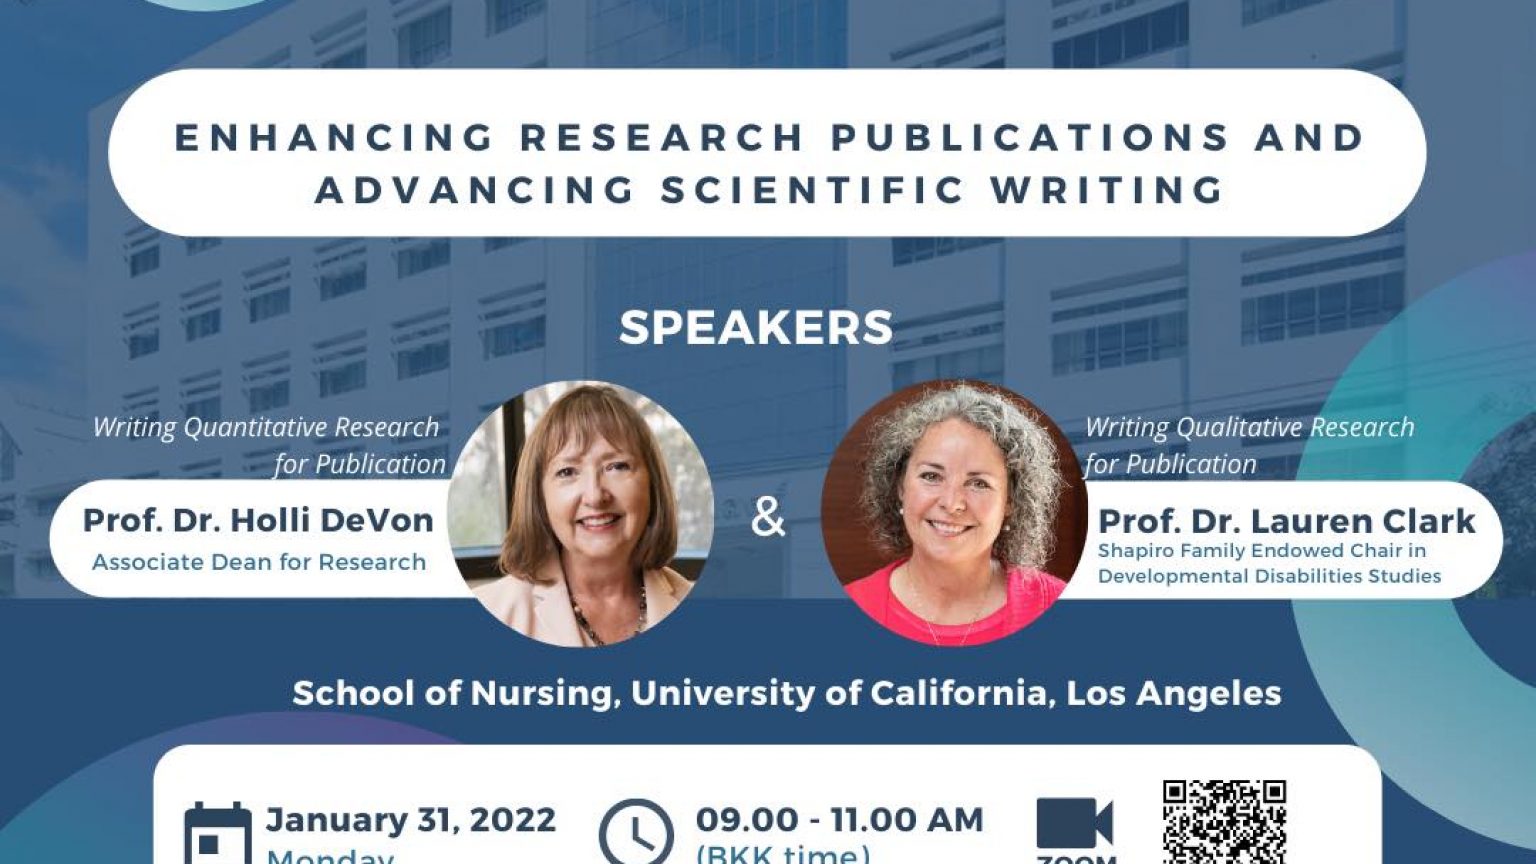 Enhancing Research Publication and Advancing Scientific Writing